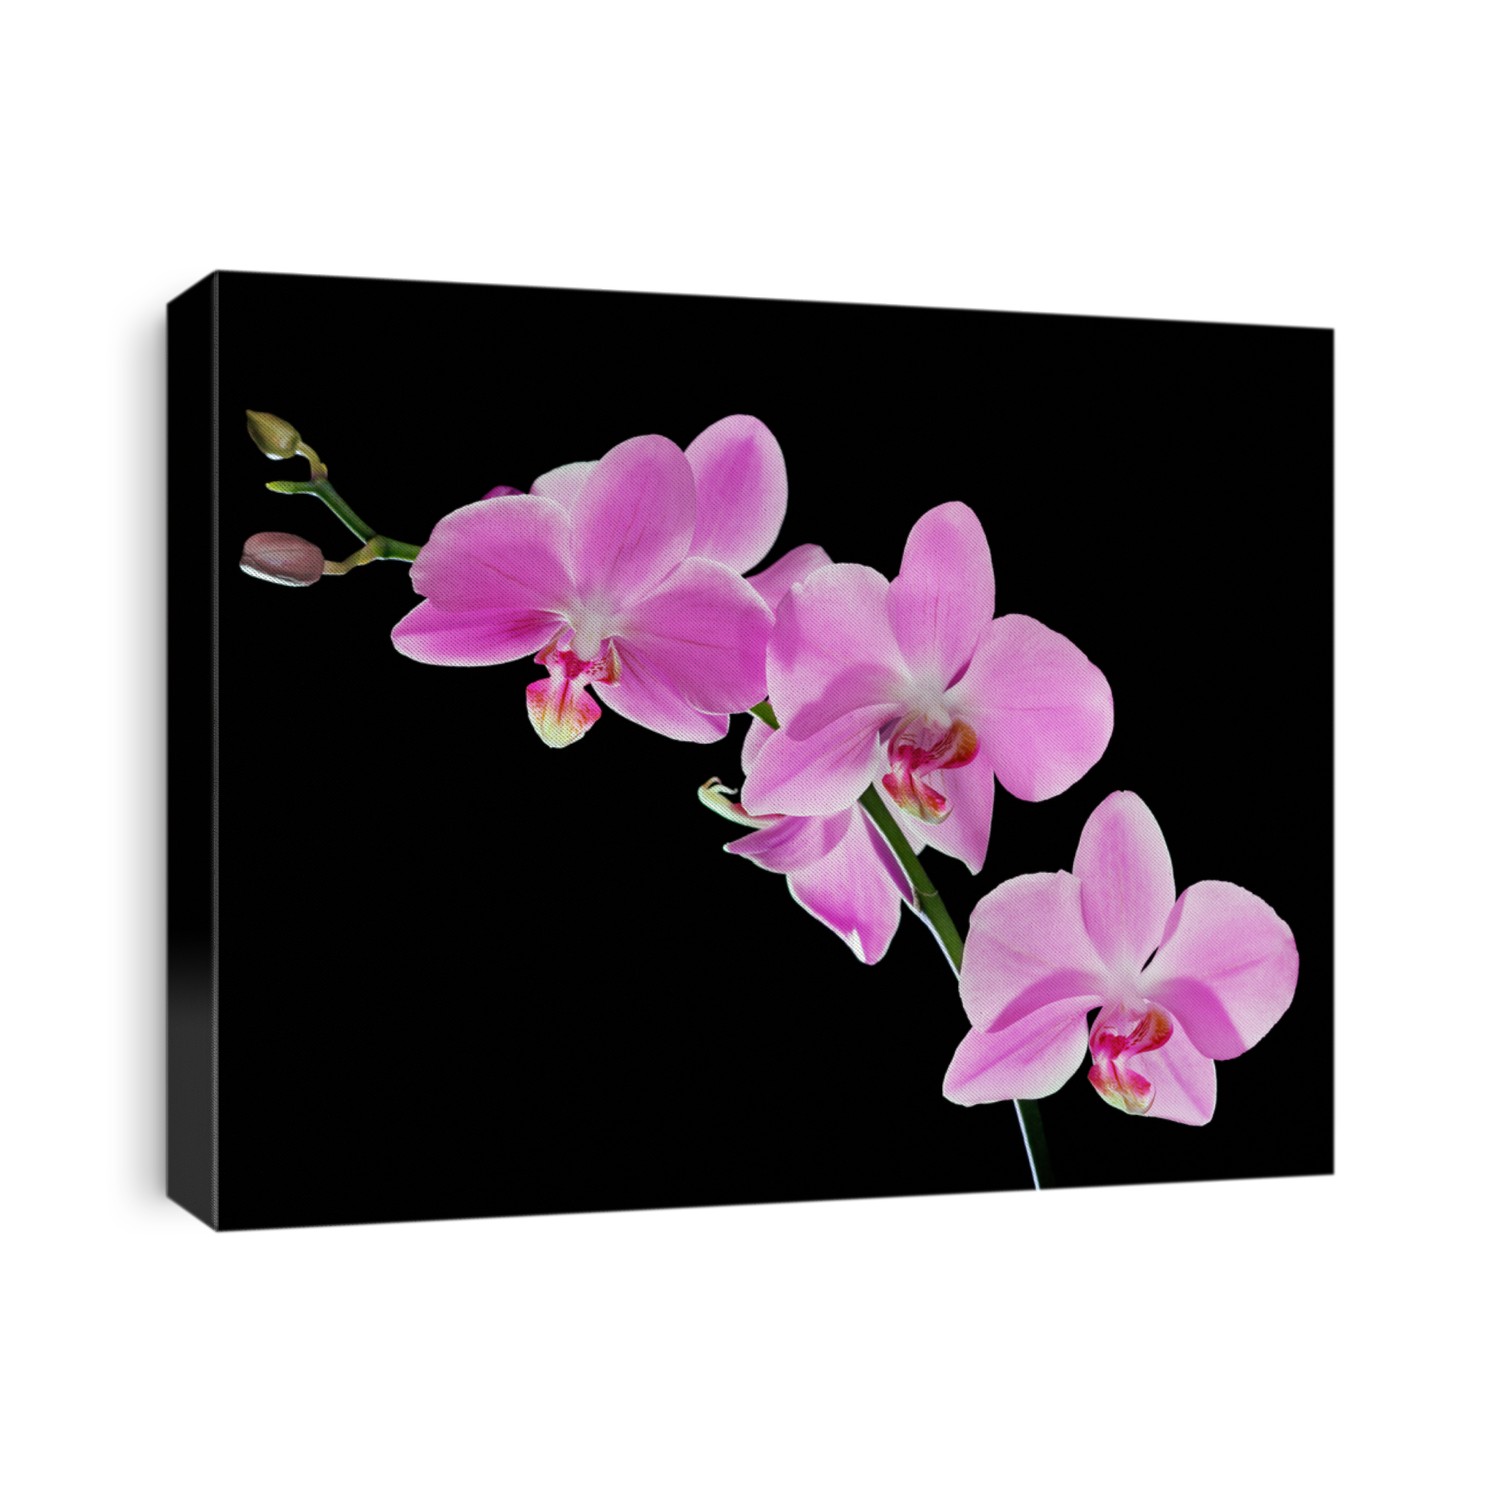 pink orchid flowers isolated on black background